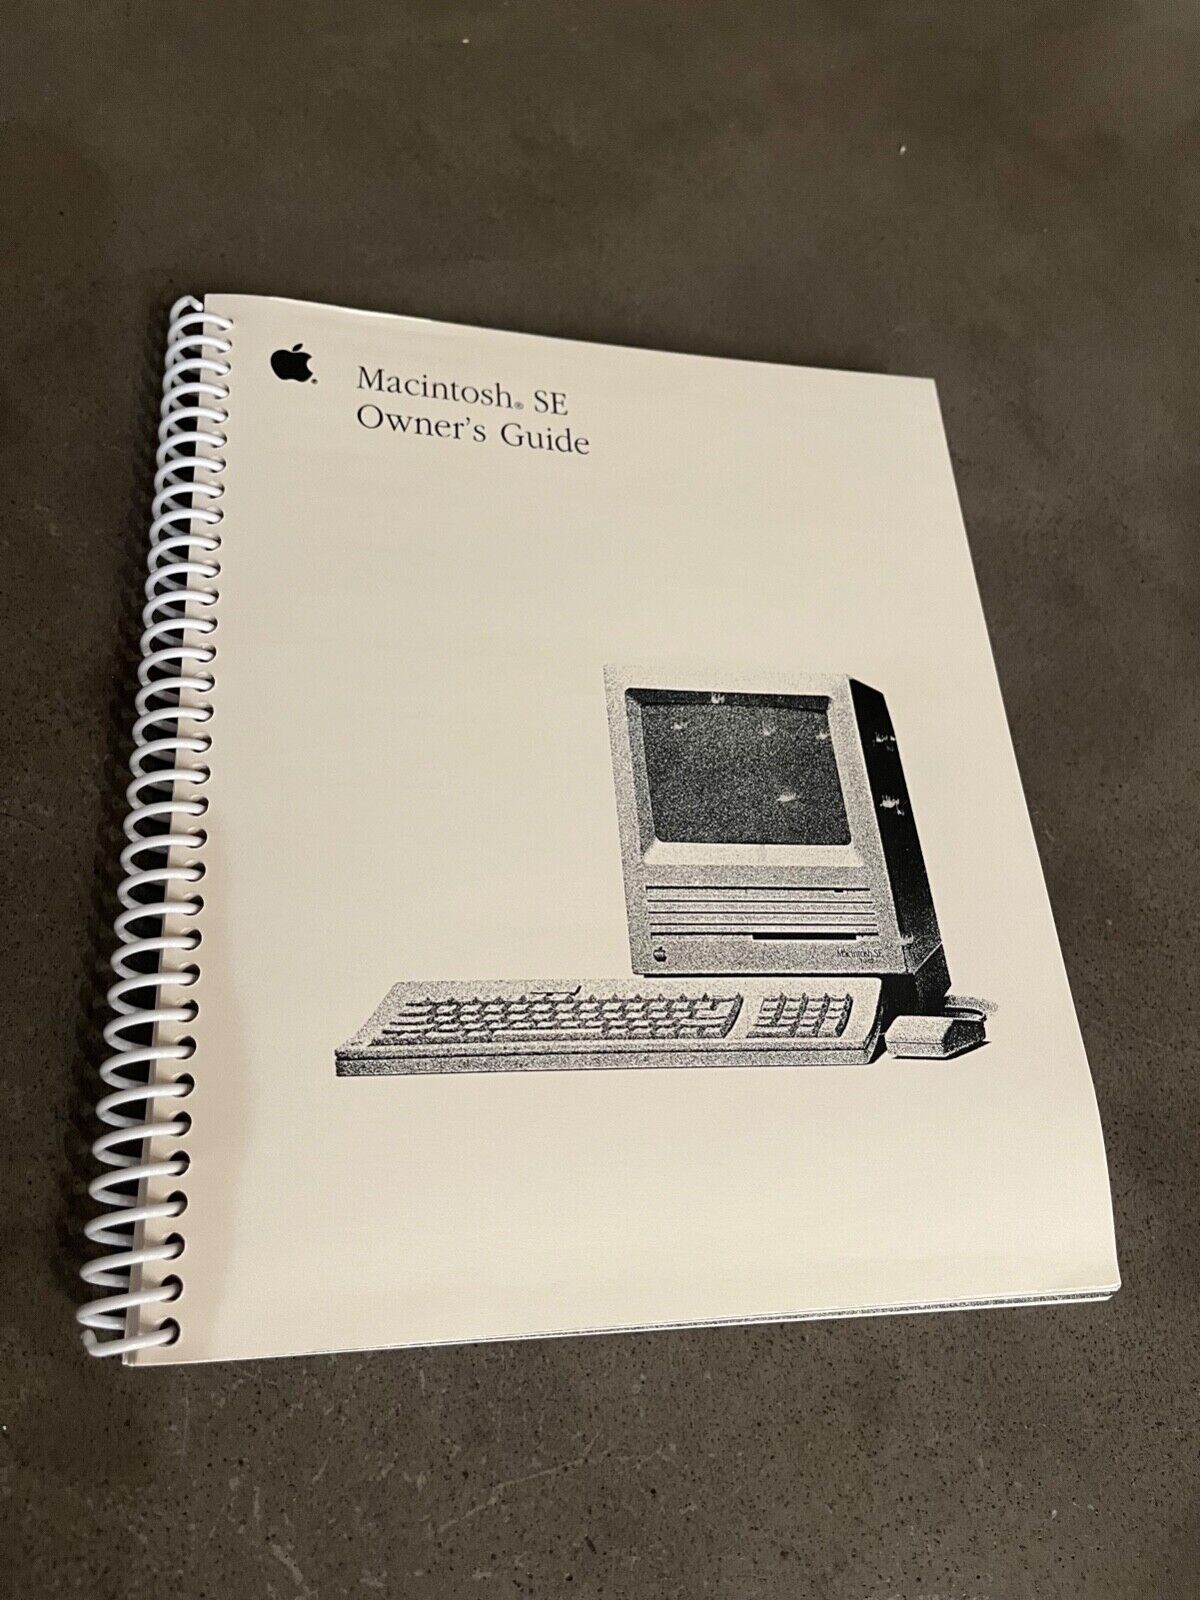 Macintosh SE Owners Guide Manuals for Apple Computer - Brand New 116 Pages